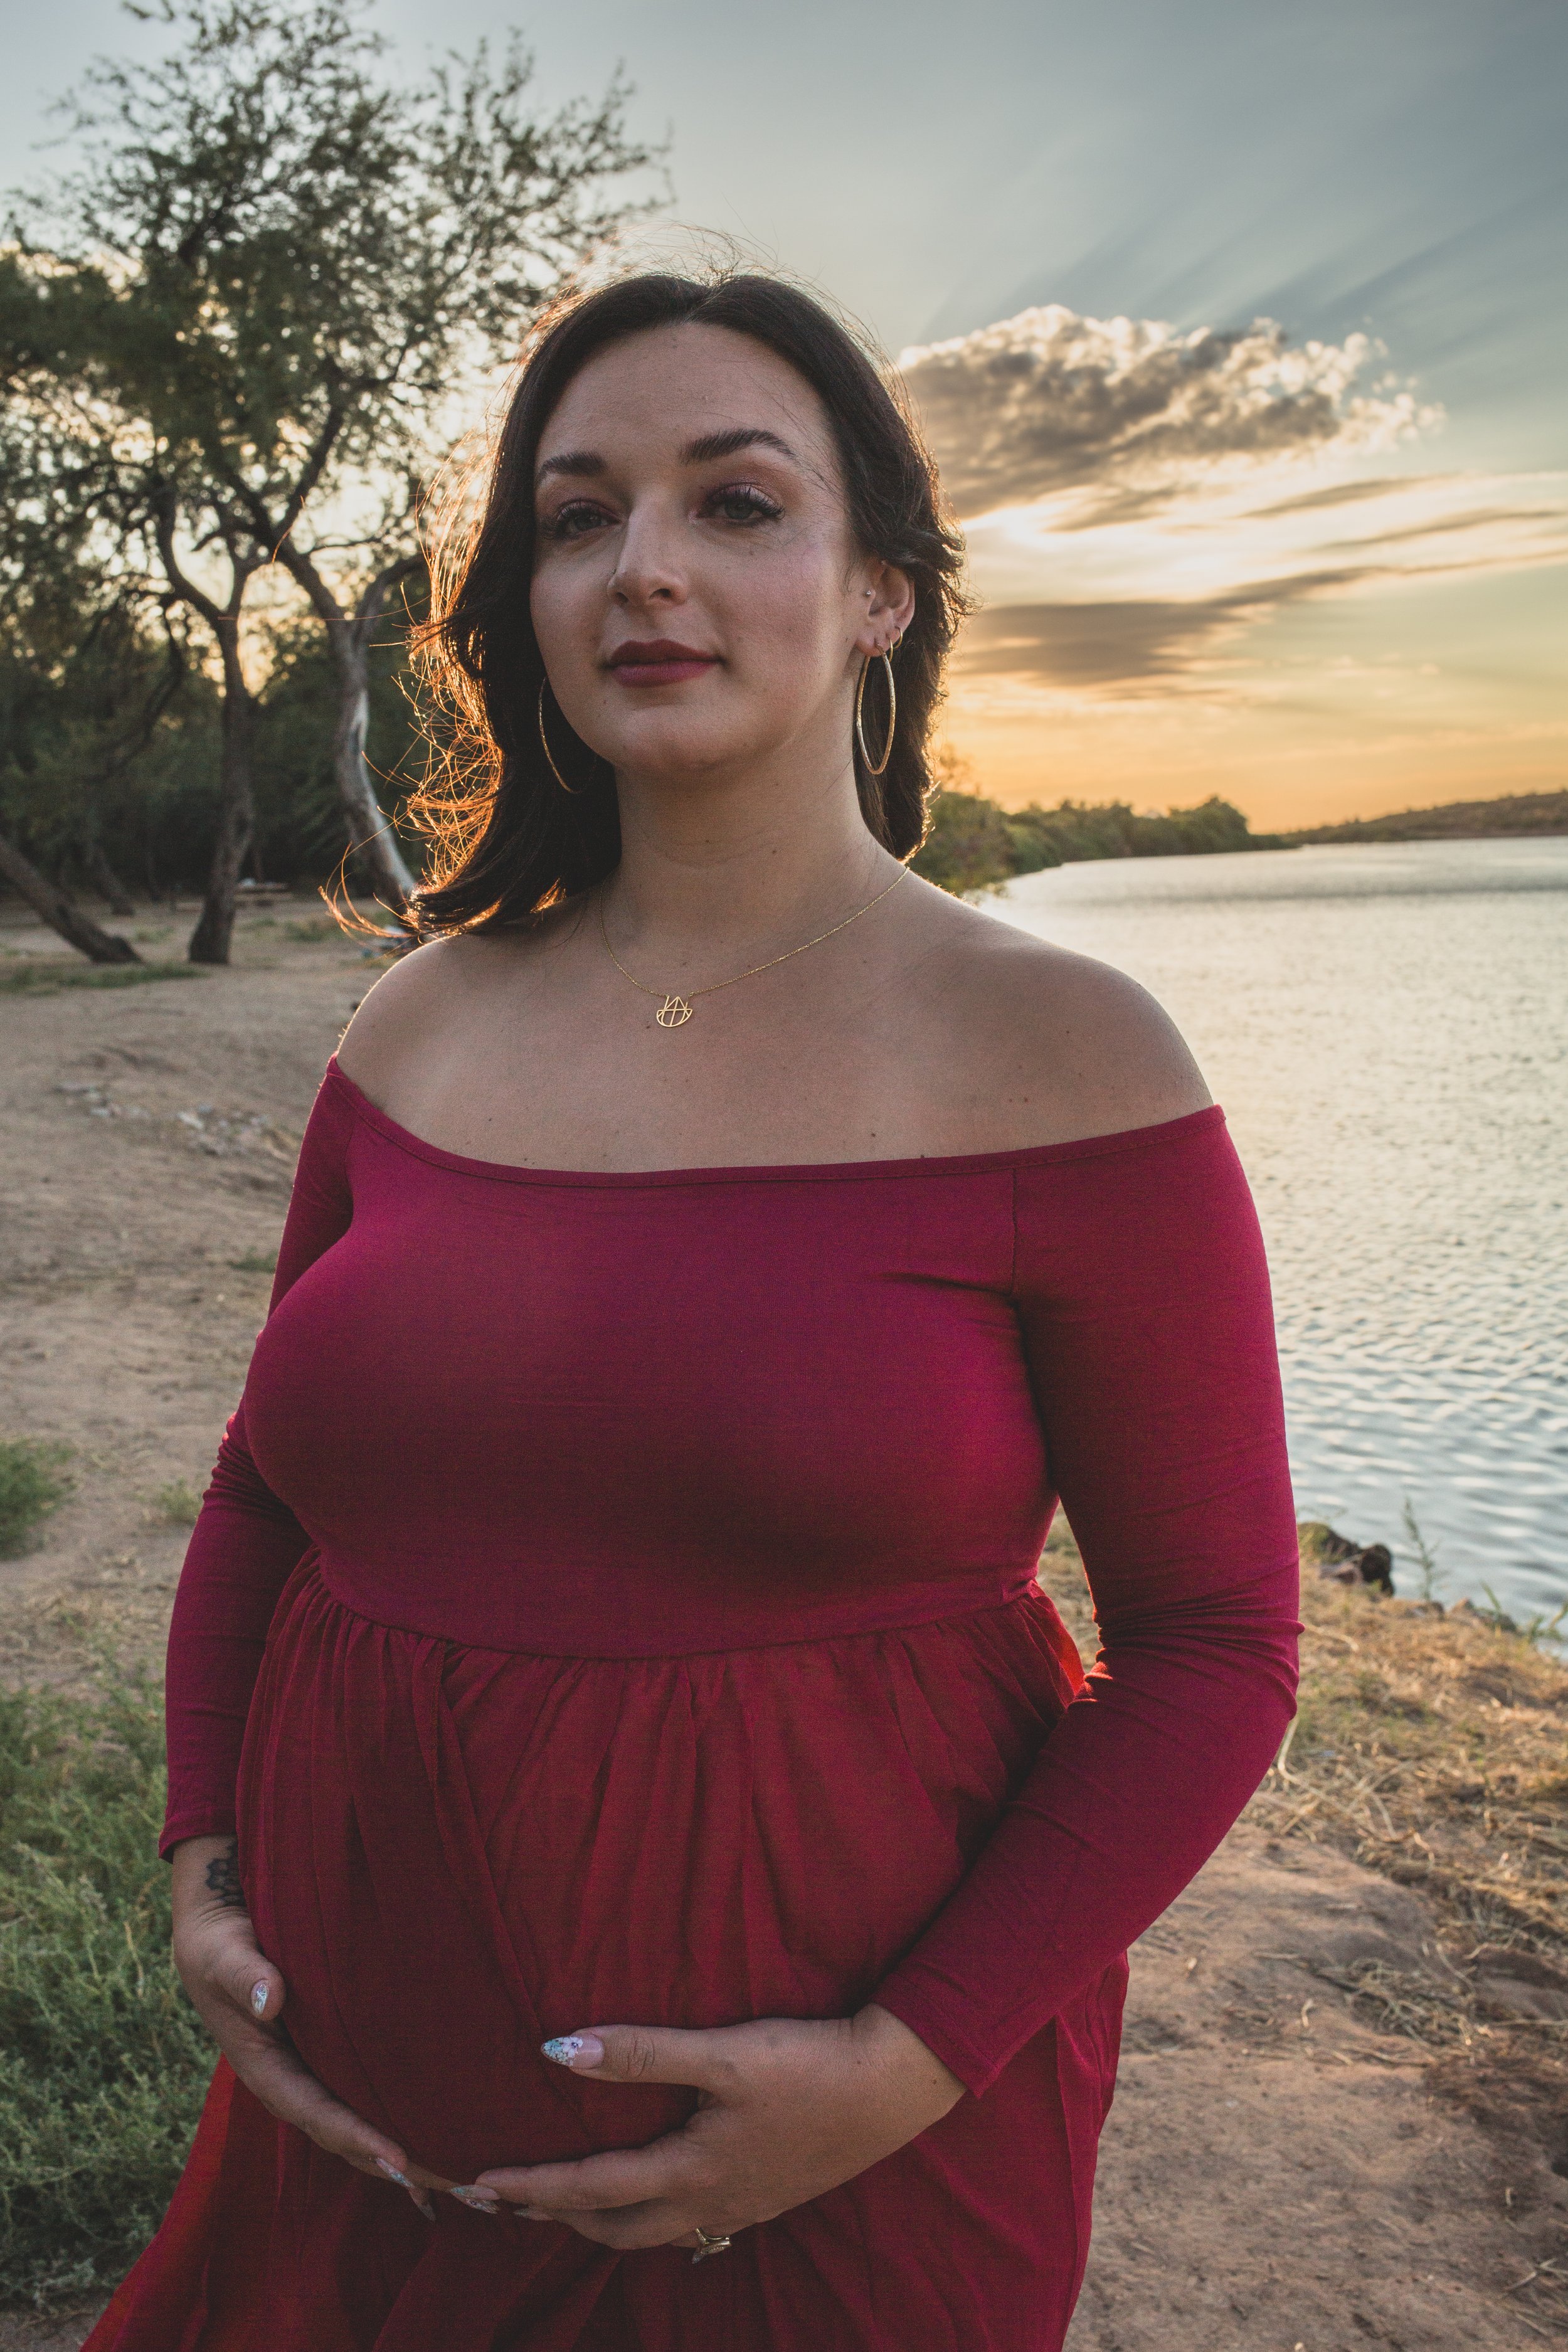 Pregnant woman in a red dress at Sunset for maternity photos in front of the Salt River by Phoenix maternity photographer in Arizona; Jennifer Lind Schutsky.